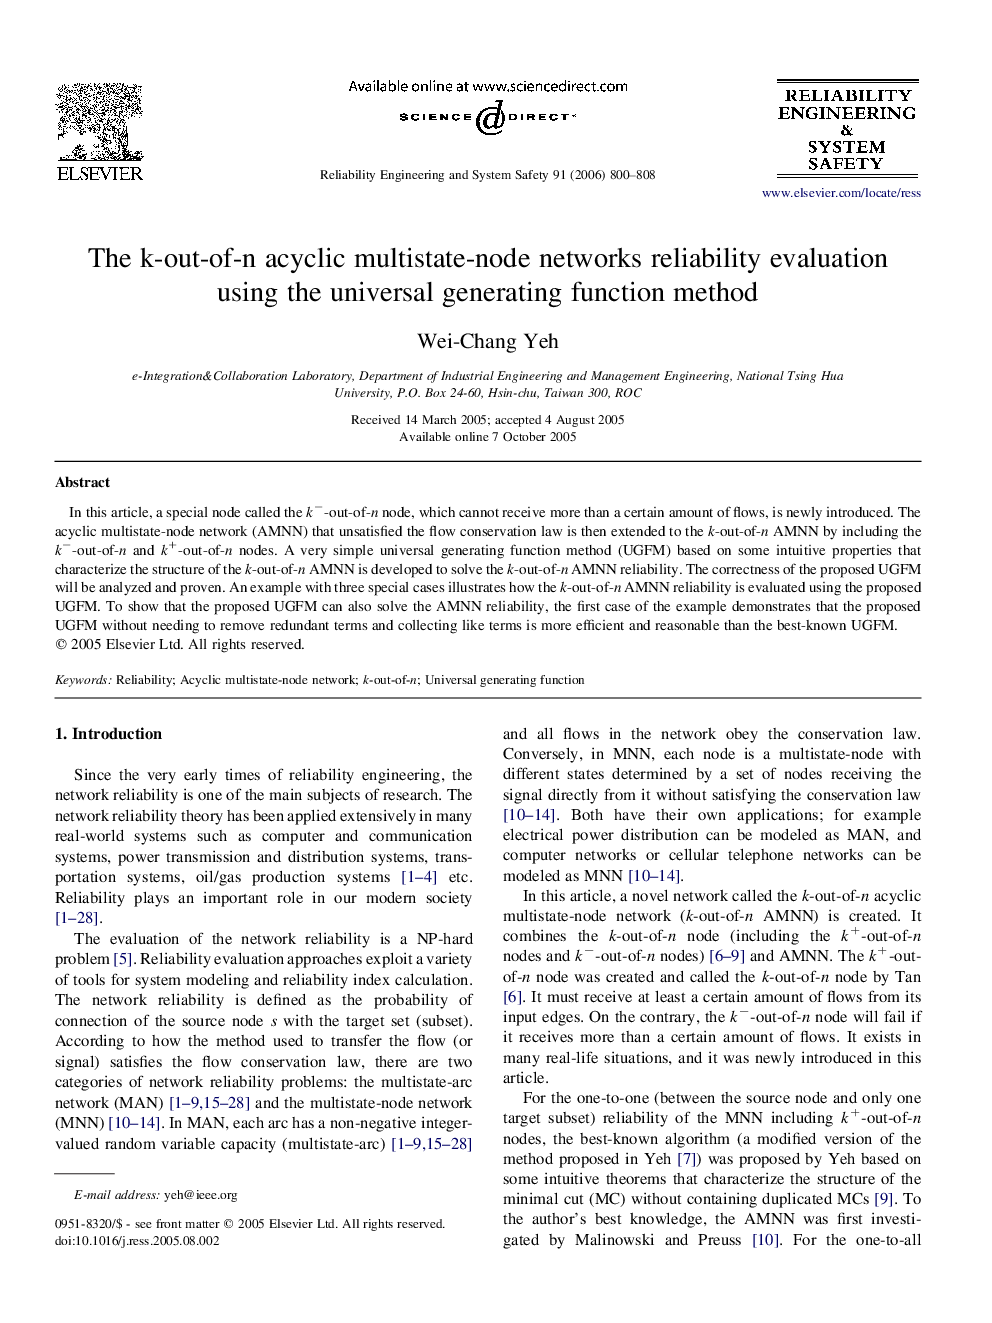 The k-out-of-n acyclic multistate-node networks reliability evaluation using the universal generating function method